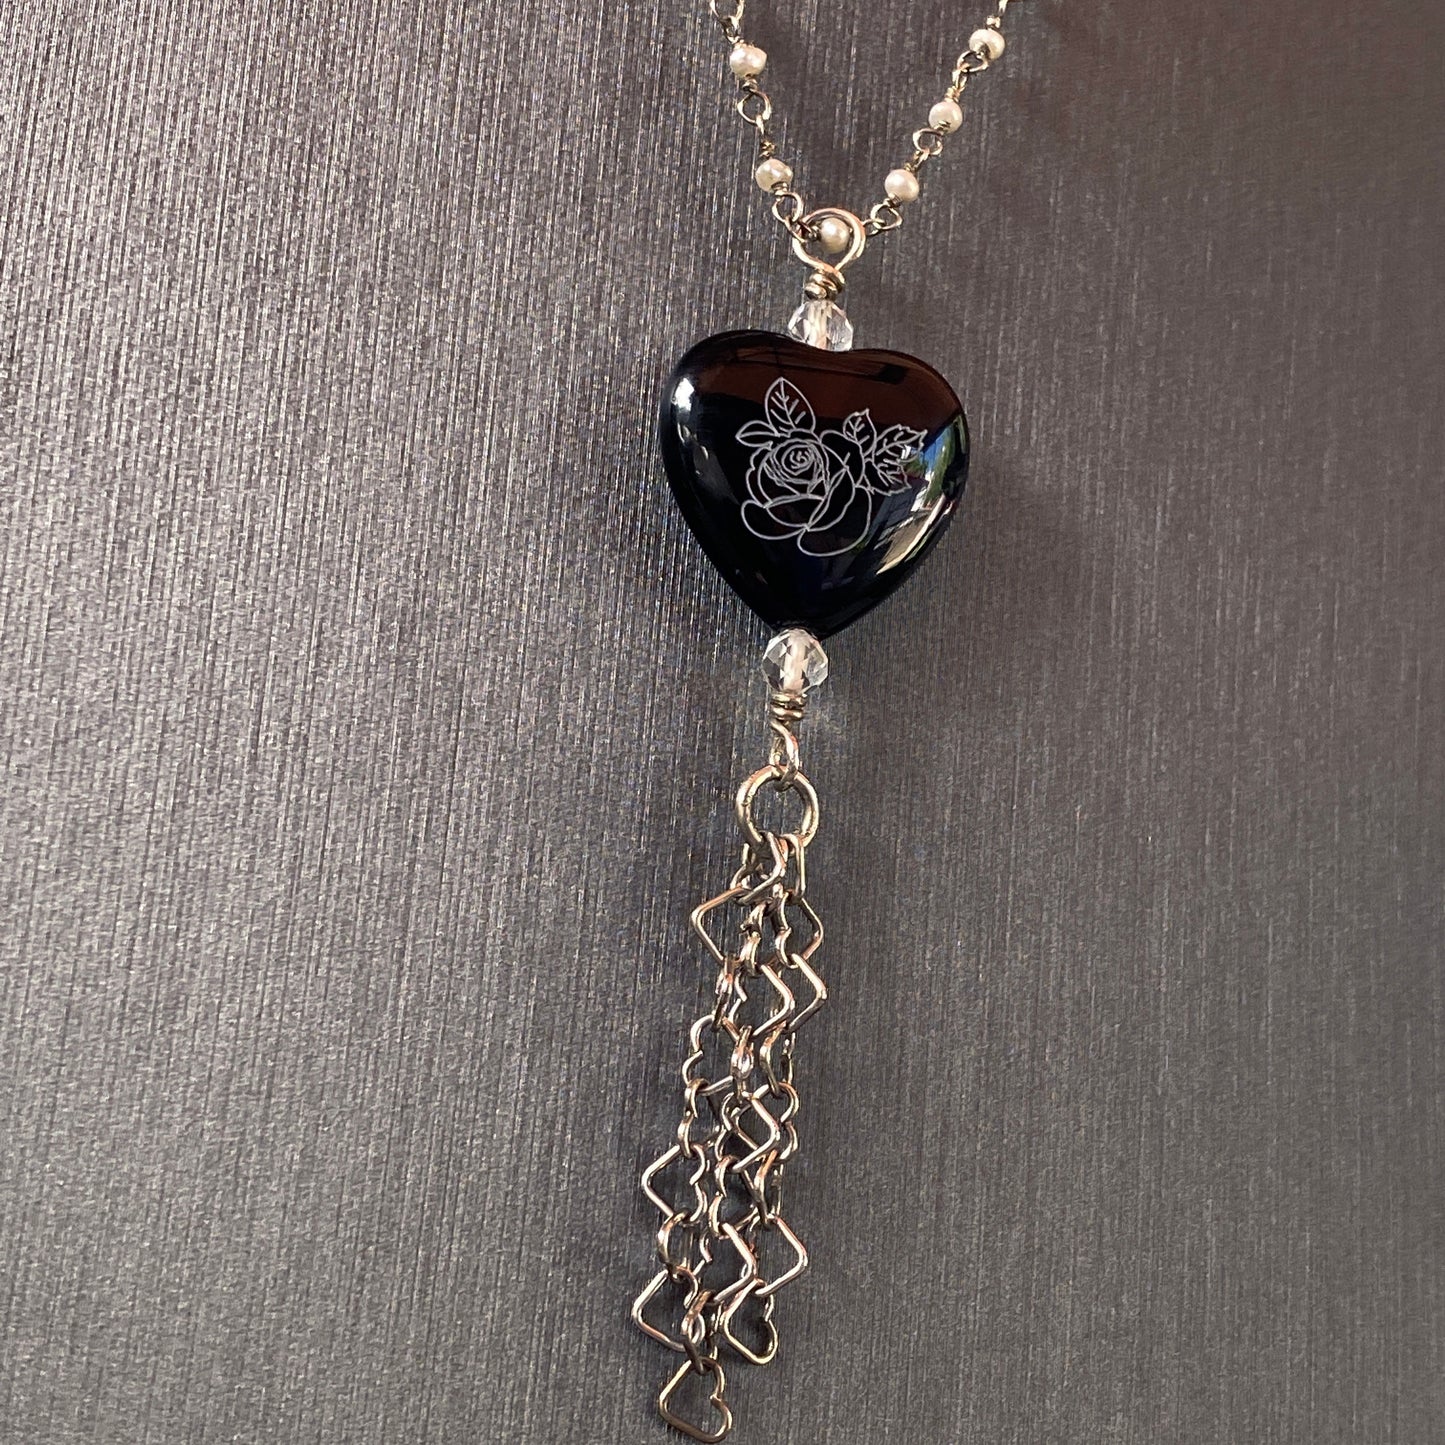 Sterling silver with freshwater pearls, painted onyx pendant, white topaz, hanging heart chain